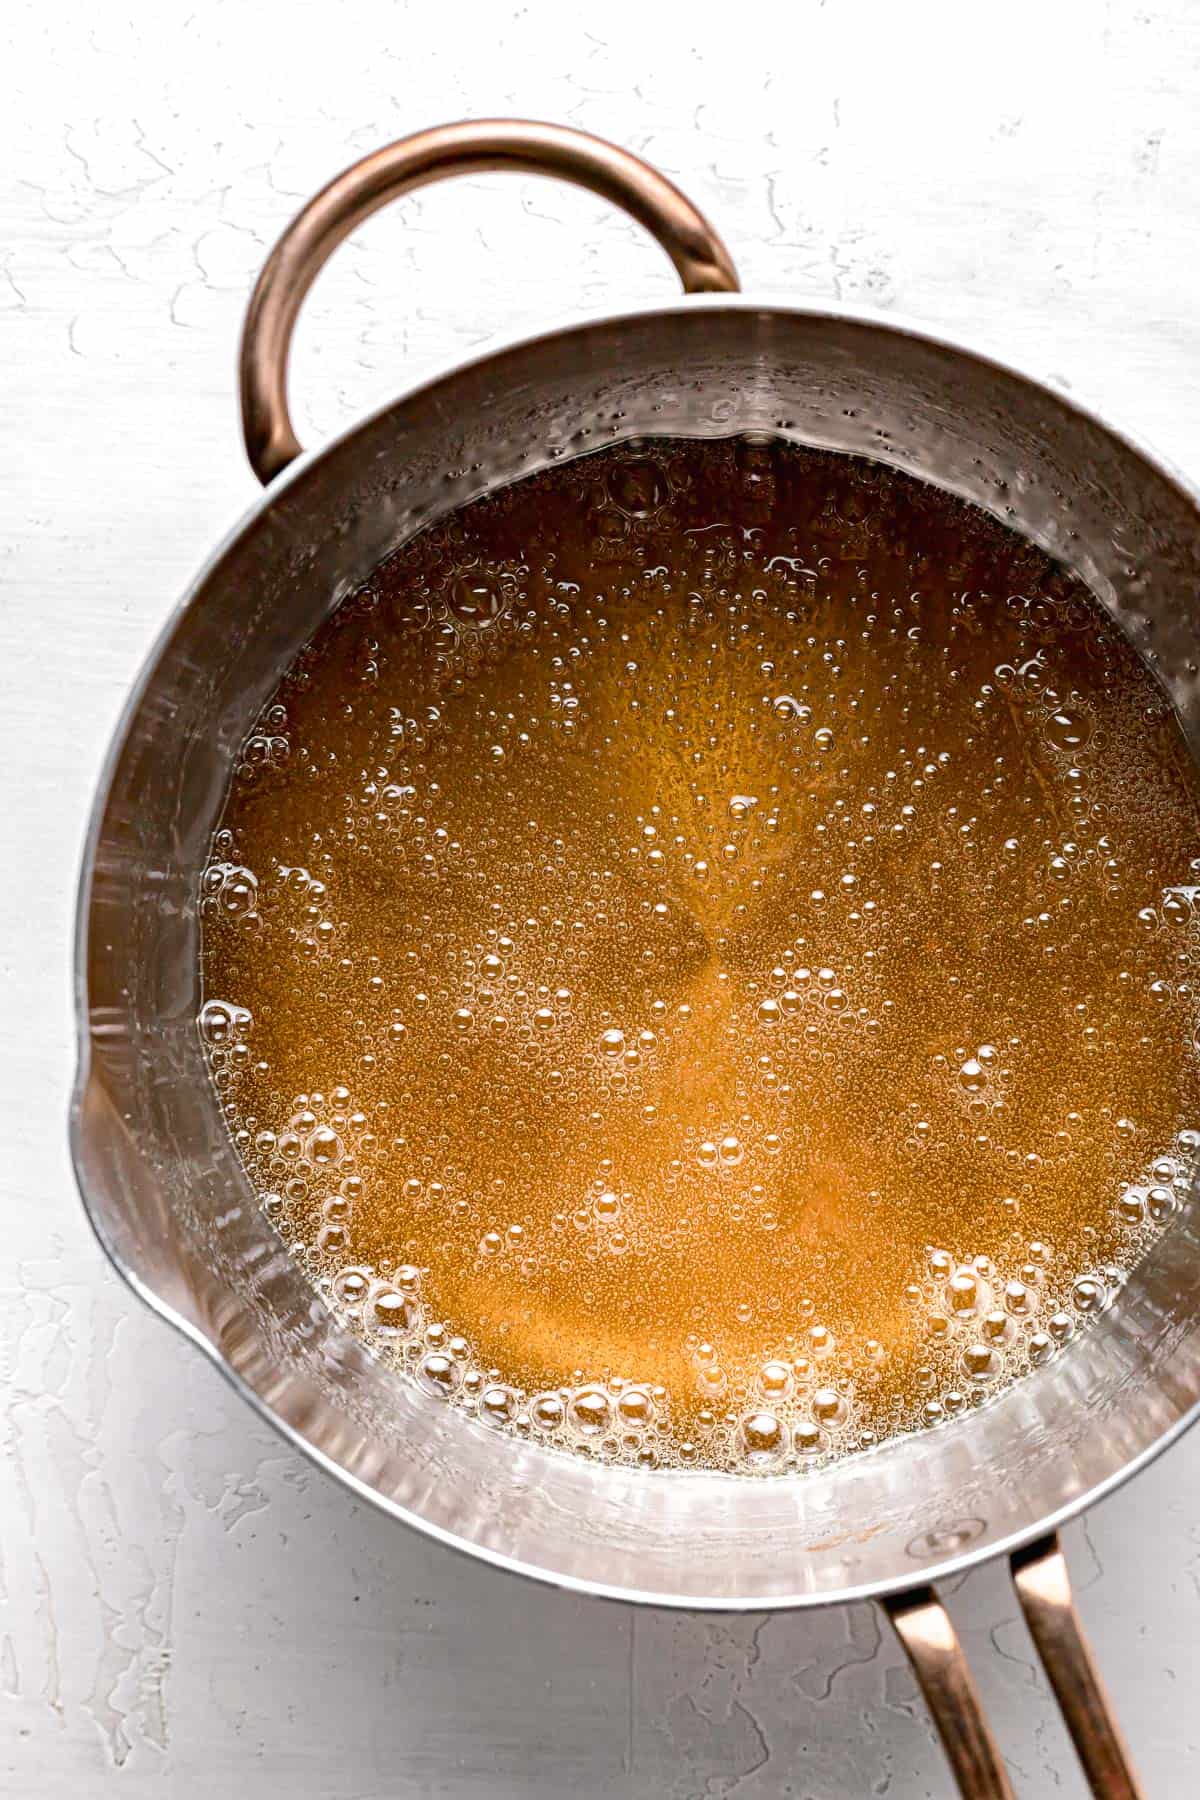 sugar and light corn syrup caramelized in saucepan.